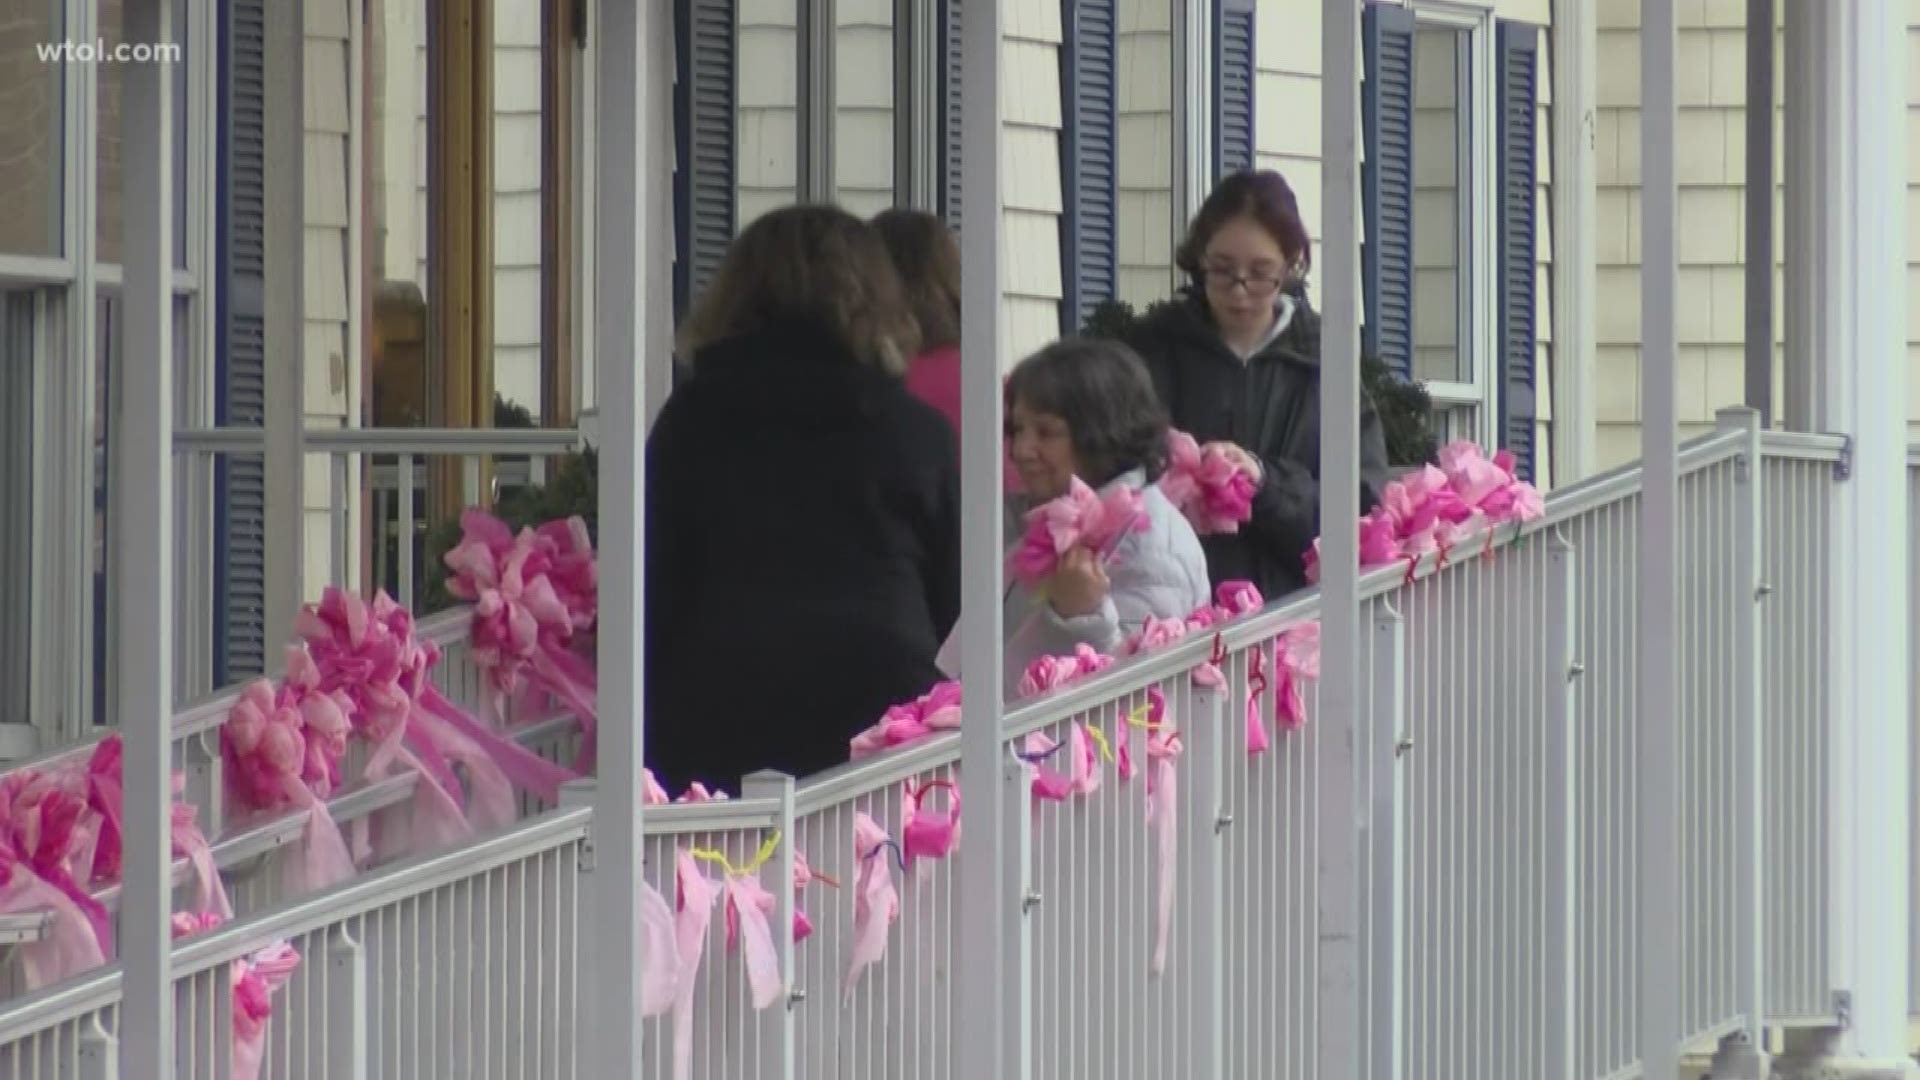 Neighbors from 30 minutes away to three hours away showed up Saturday to pay respects to Harley Dilly's family.